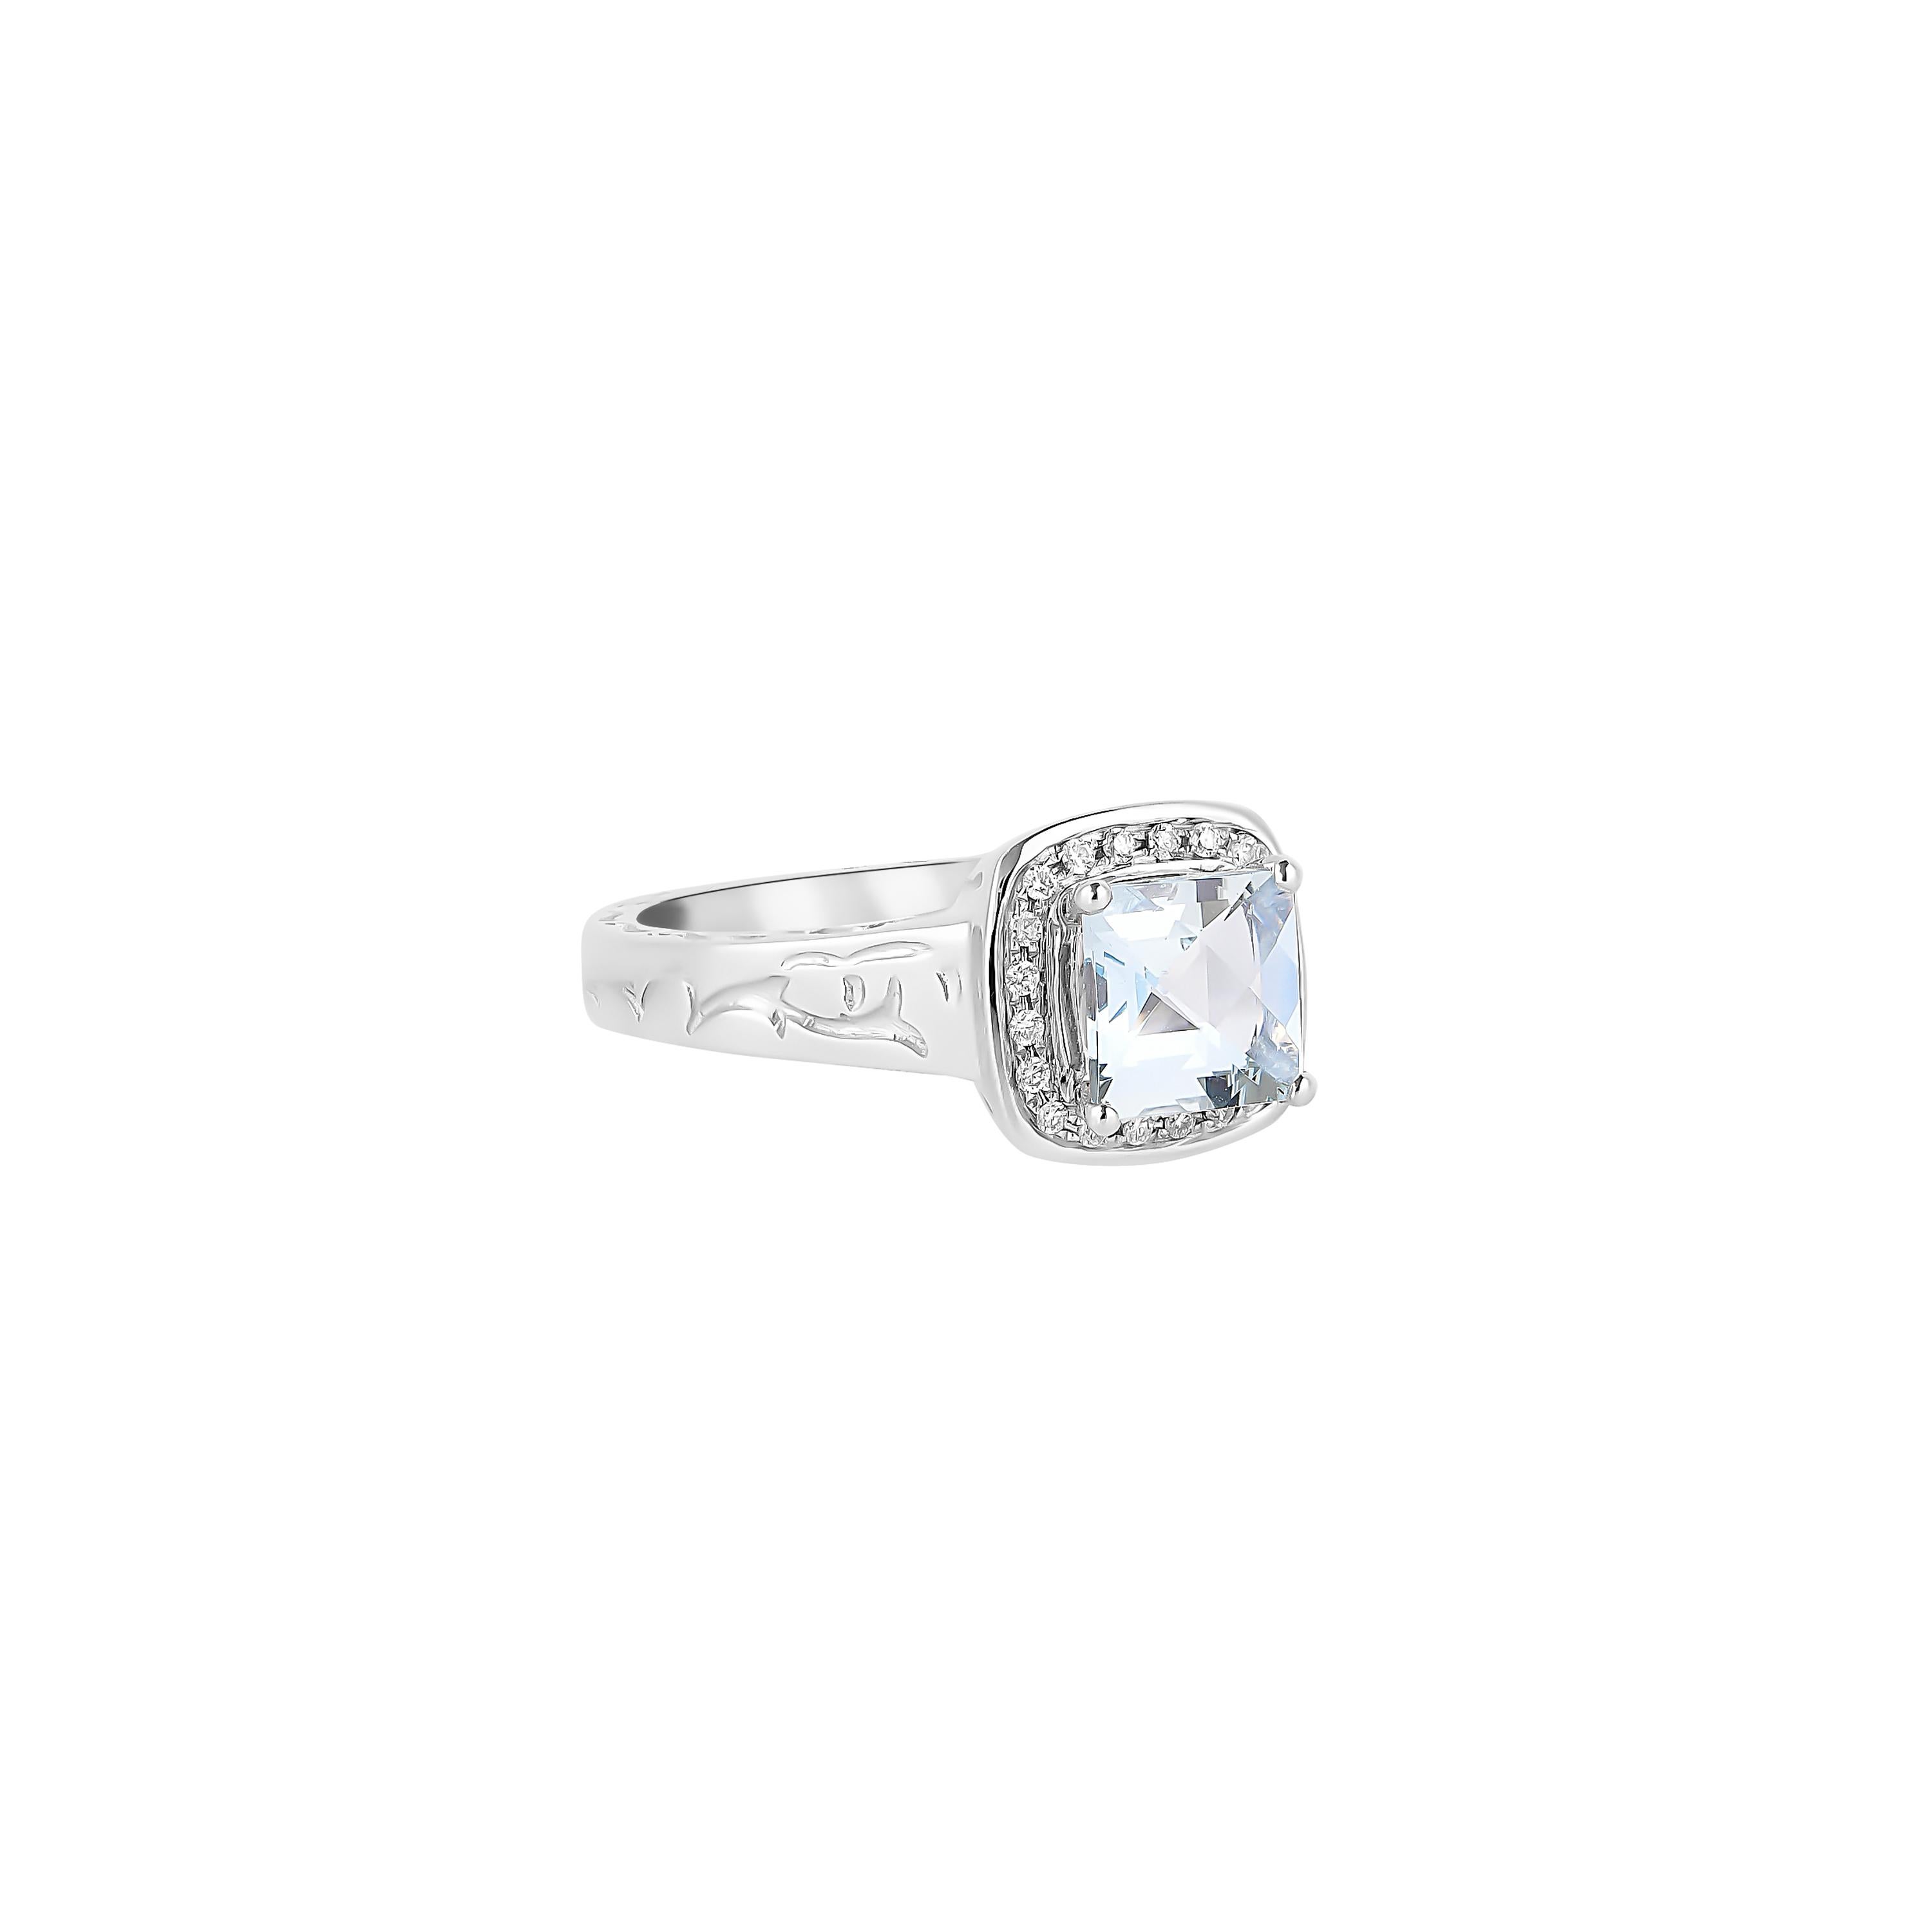 This collection features an array of aquamarines with an icy blue hue that is as cool as it gets! Accented with diamonds these rings are made in white and present a classic yet elegant look. 

Classic aquamarine ring in 14K white gold with diamonds.